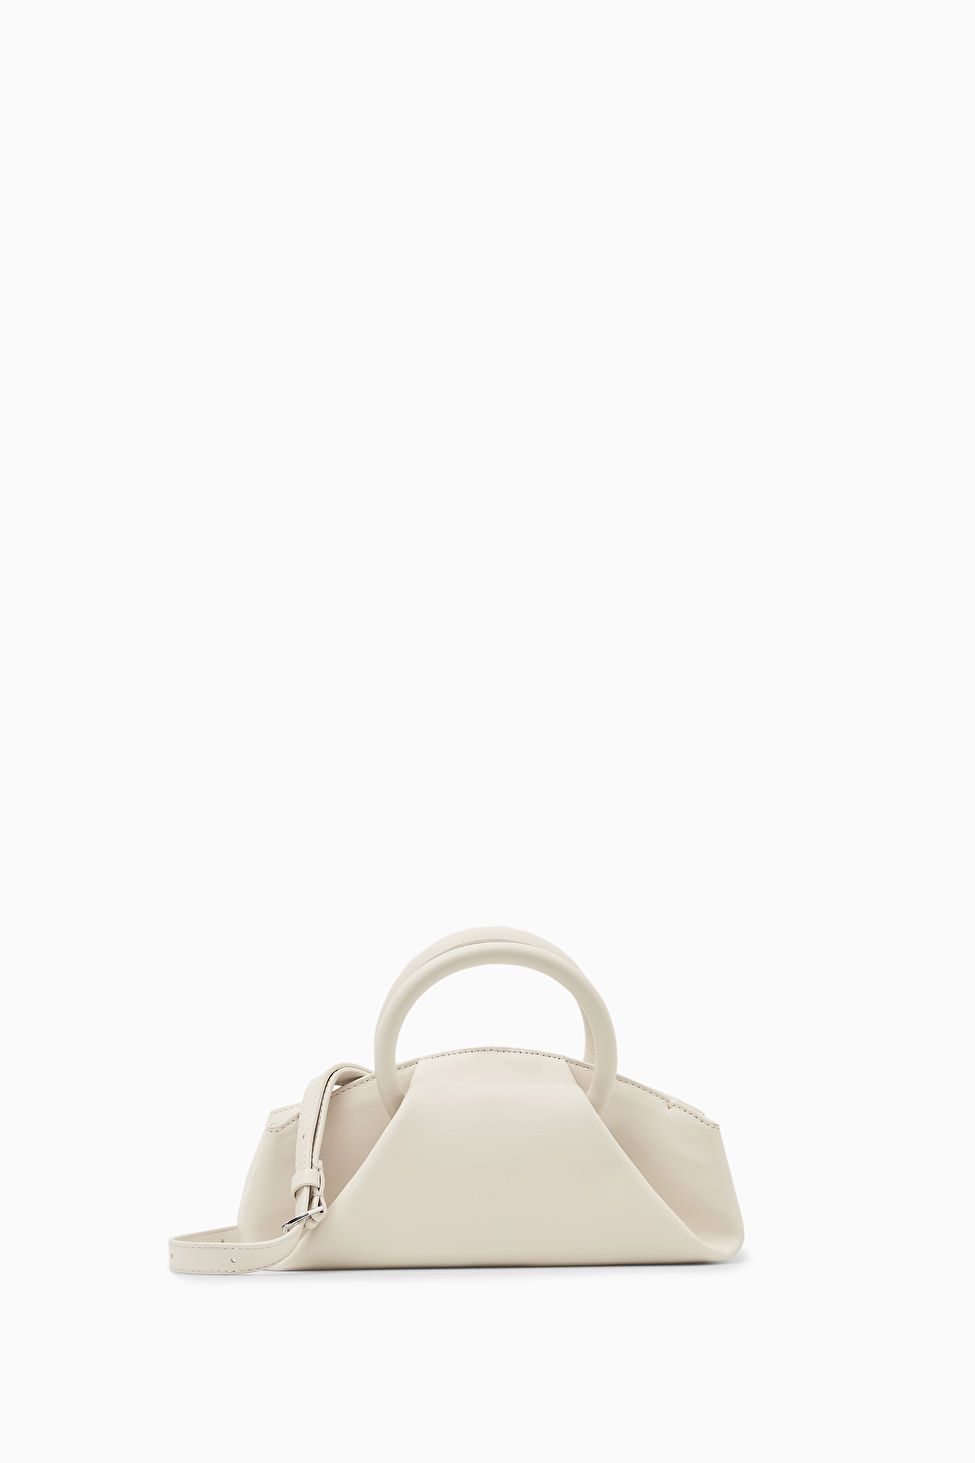 FOLD MICRO TOTE - LEATHER - OFF-WHITE - COS | COS UK